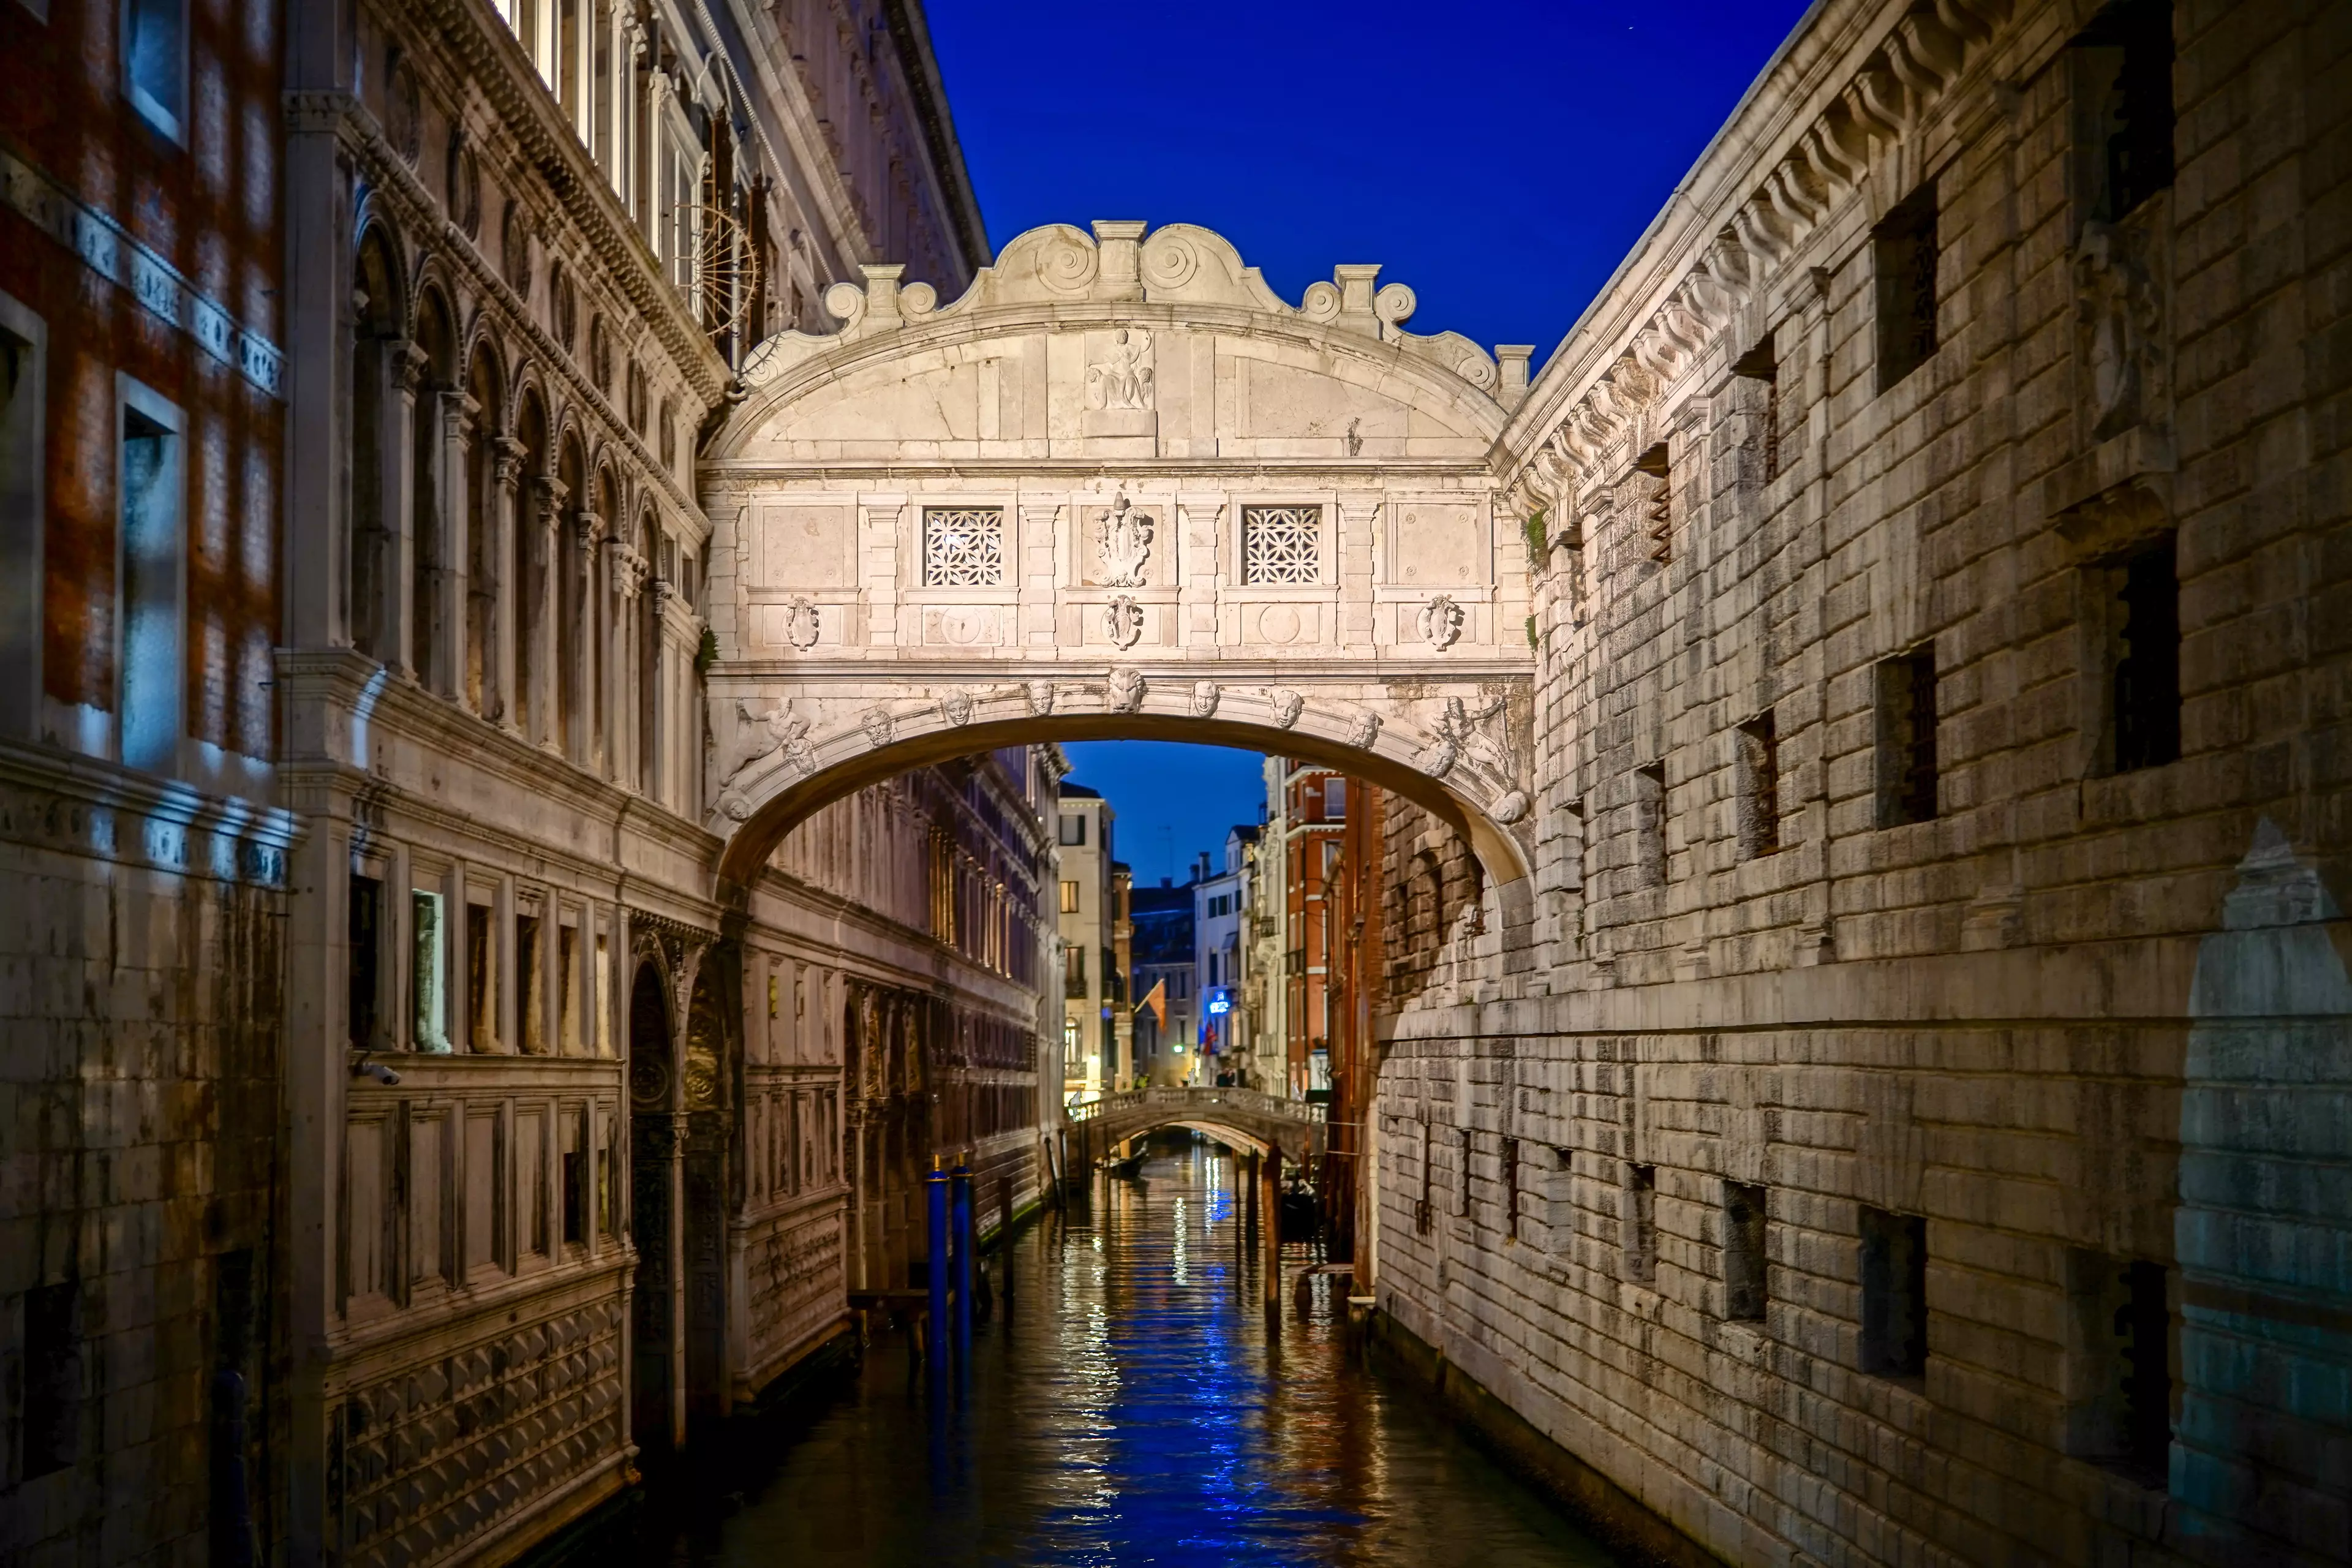 Venice draws in millions of visitors every year.